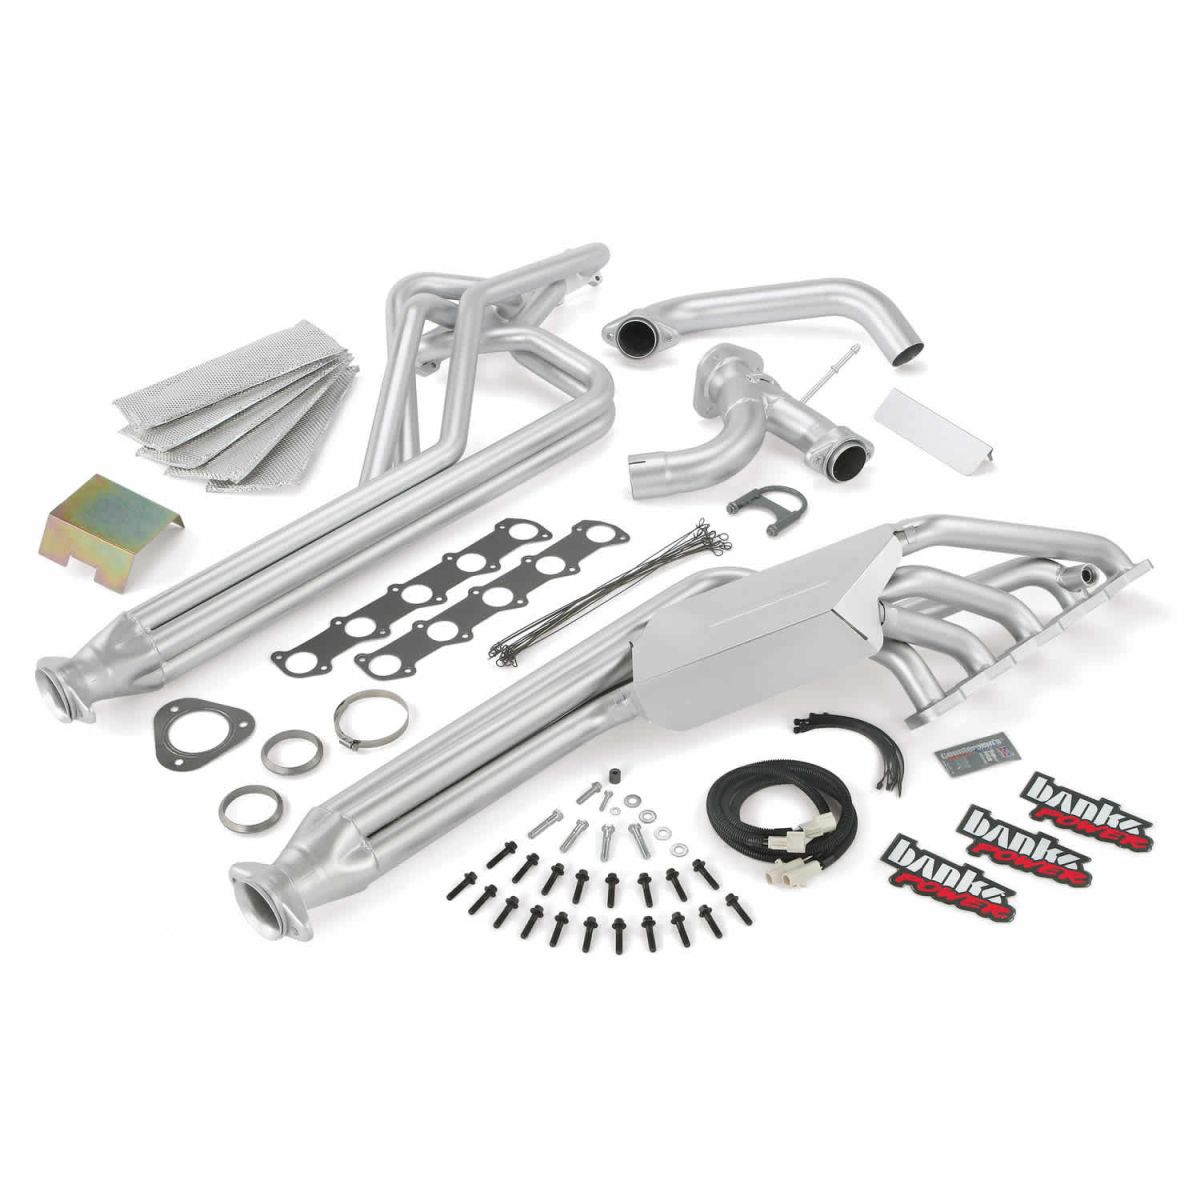 Banks Power - Banks Power Torque Tube Exhaust Header System 97-03 Ford F-53 6.8L V-10 Class-A Motorhome No EGR